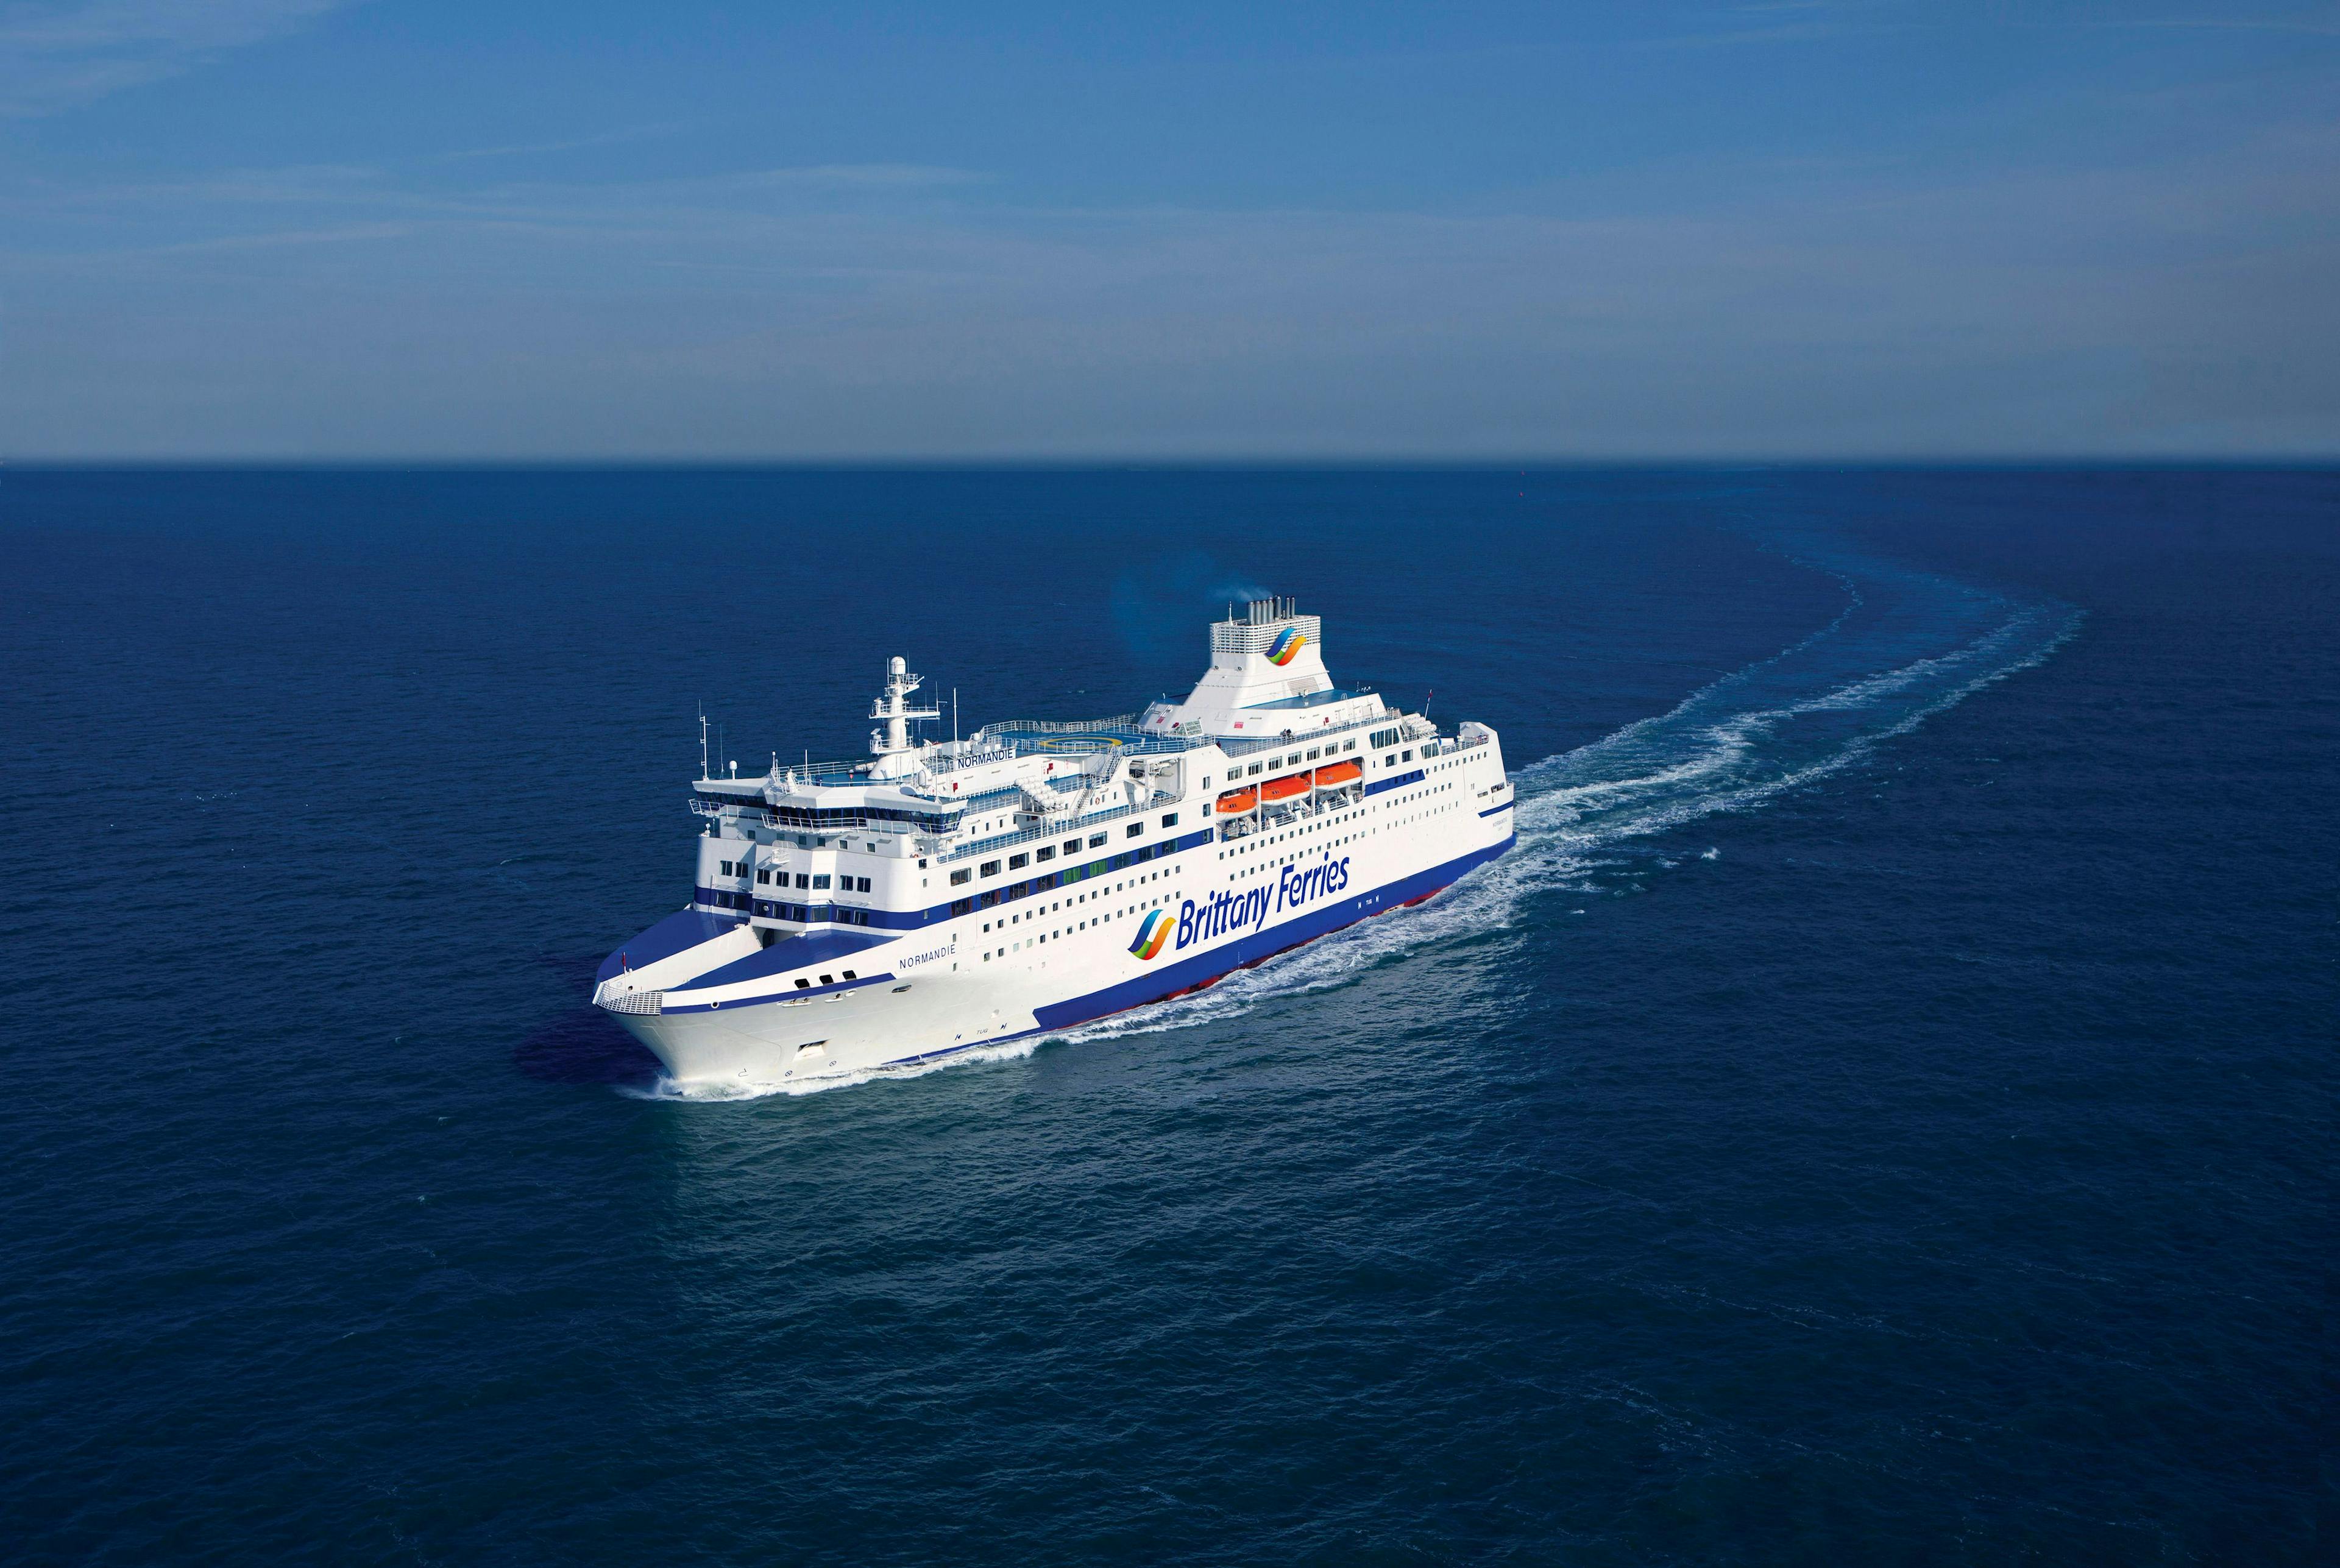 ferry Brittany ferries